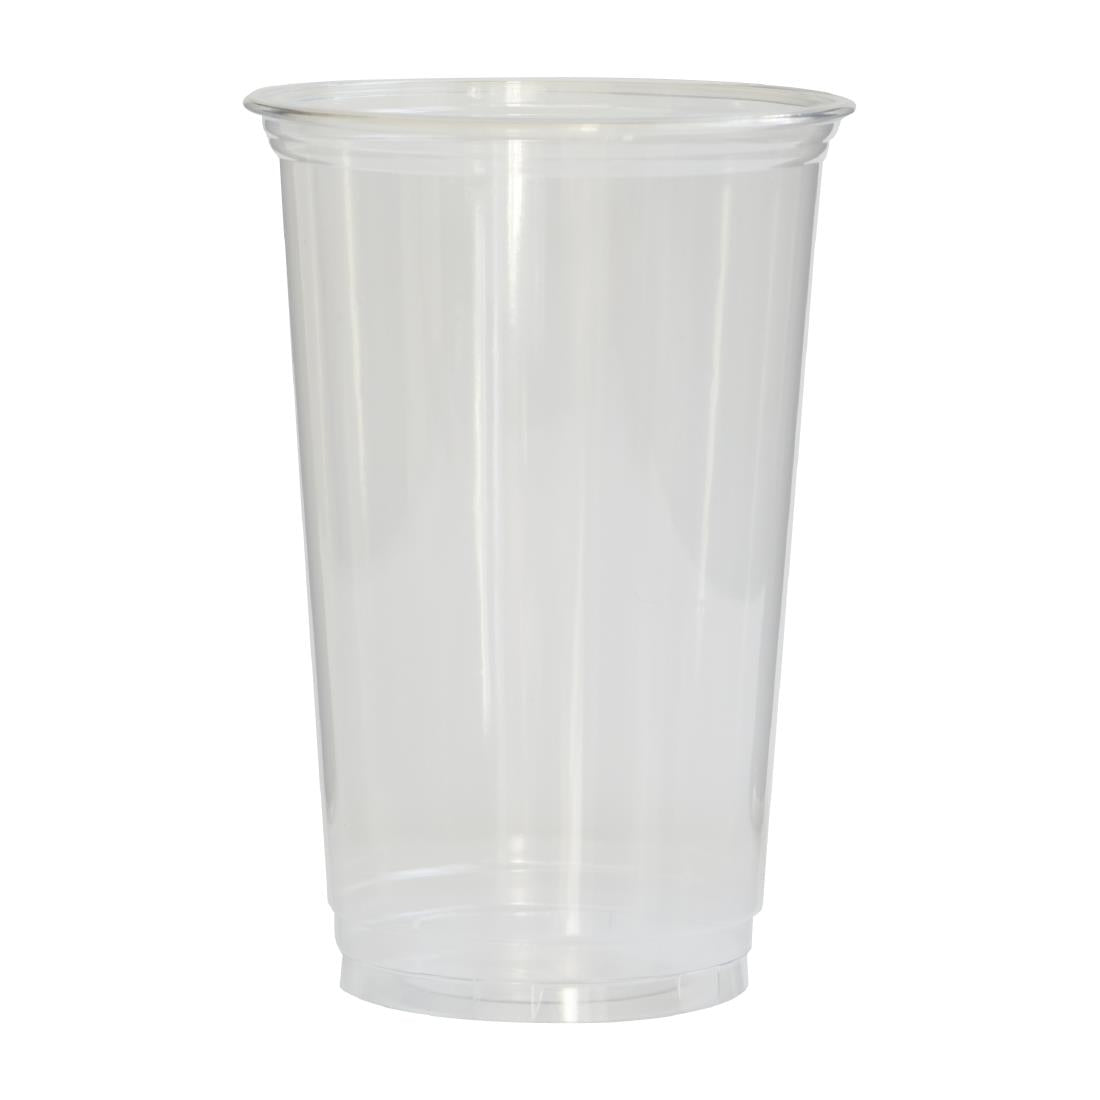 eGreen Disposable Pint Glasses to Brim UKCA CE Marked (Pack of 1000)